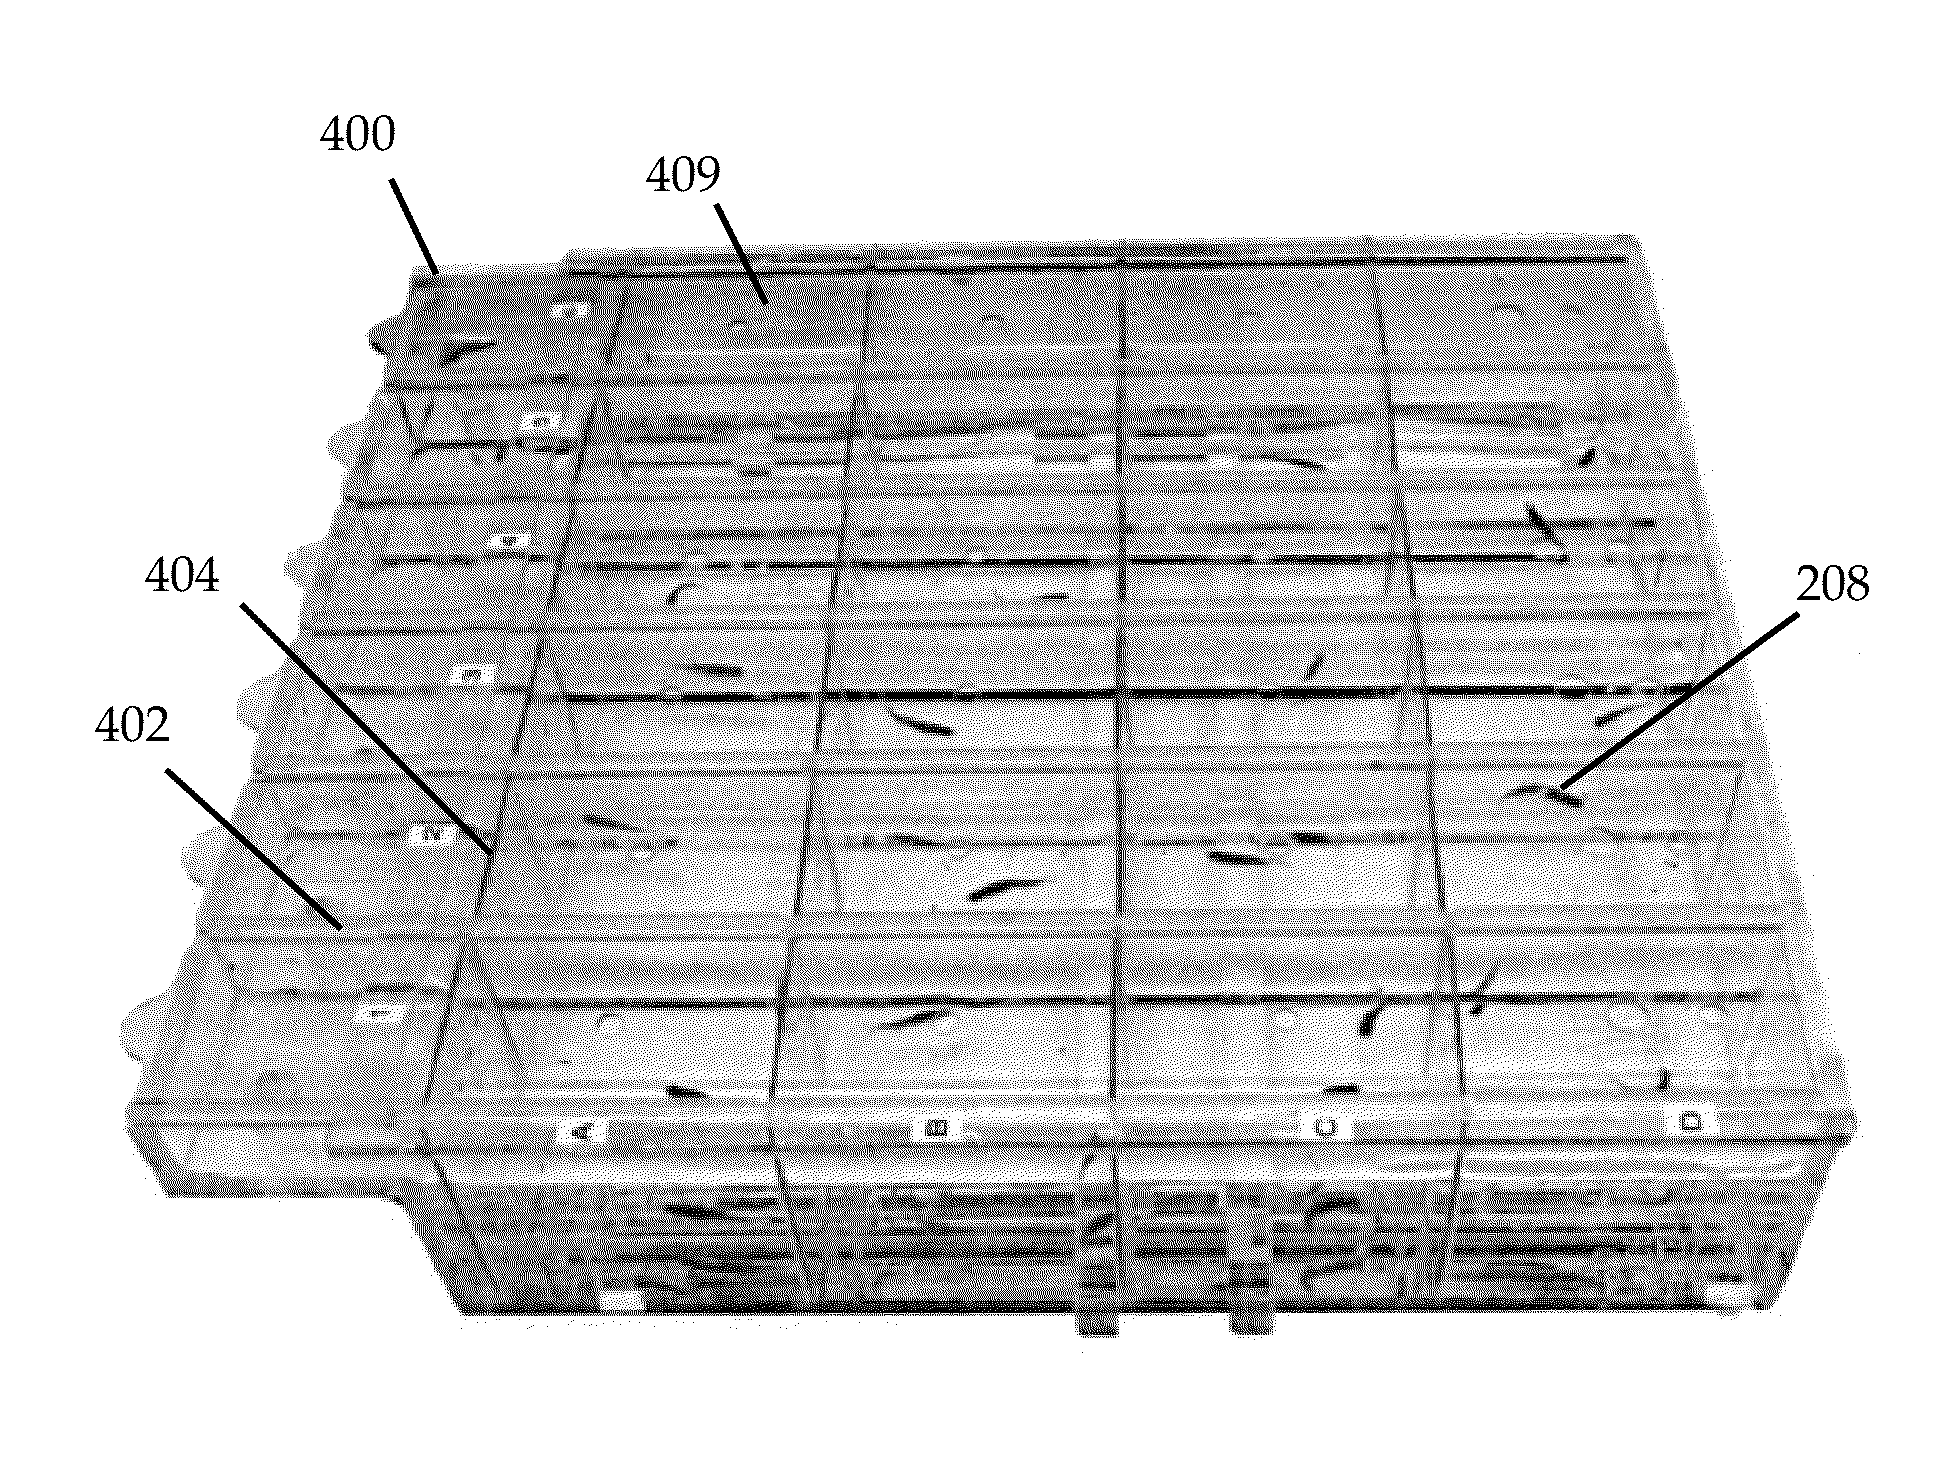 Apparatus and method for research and testing of small aquatic species